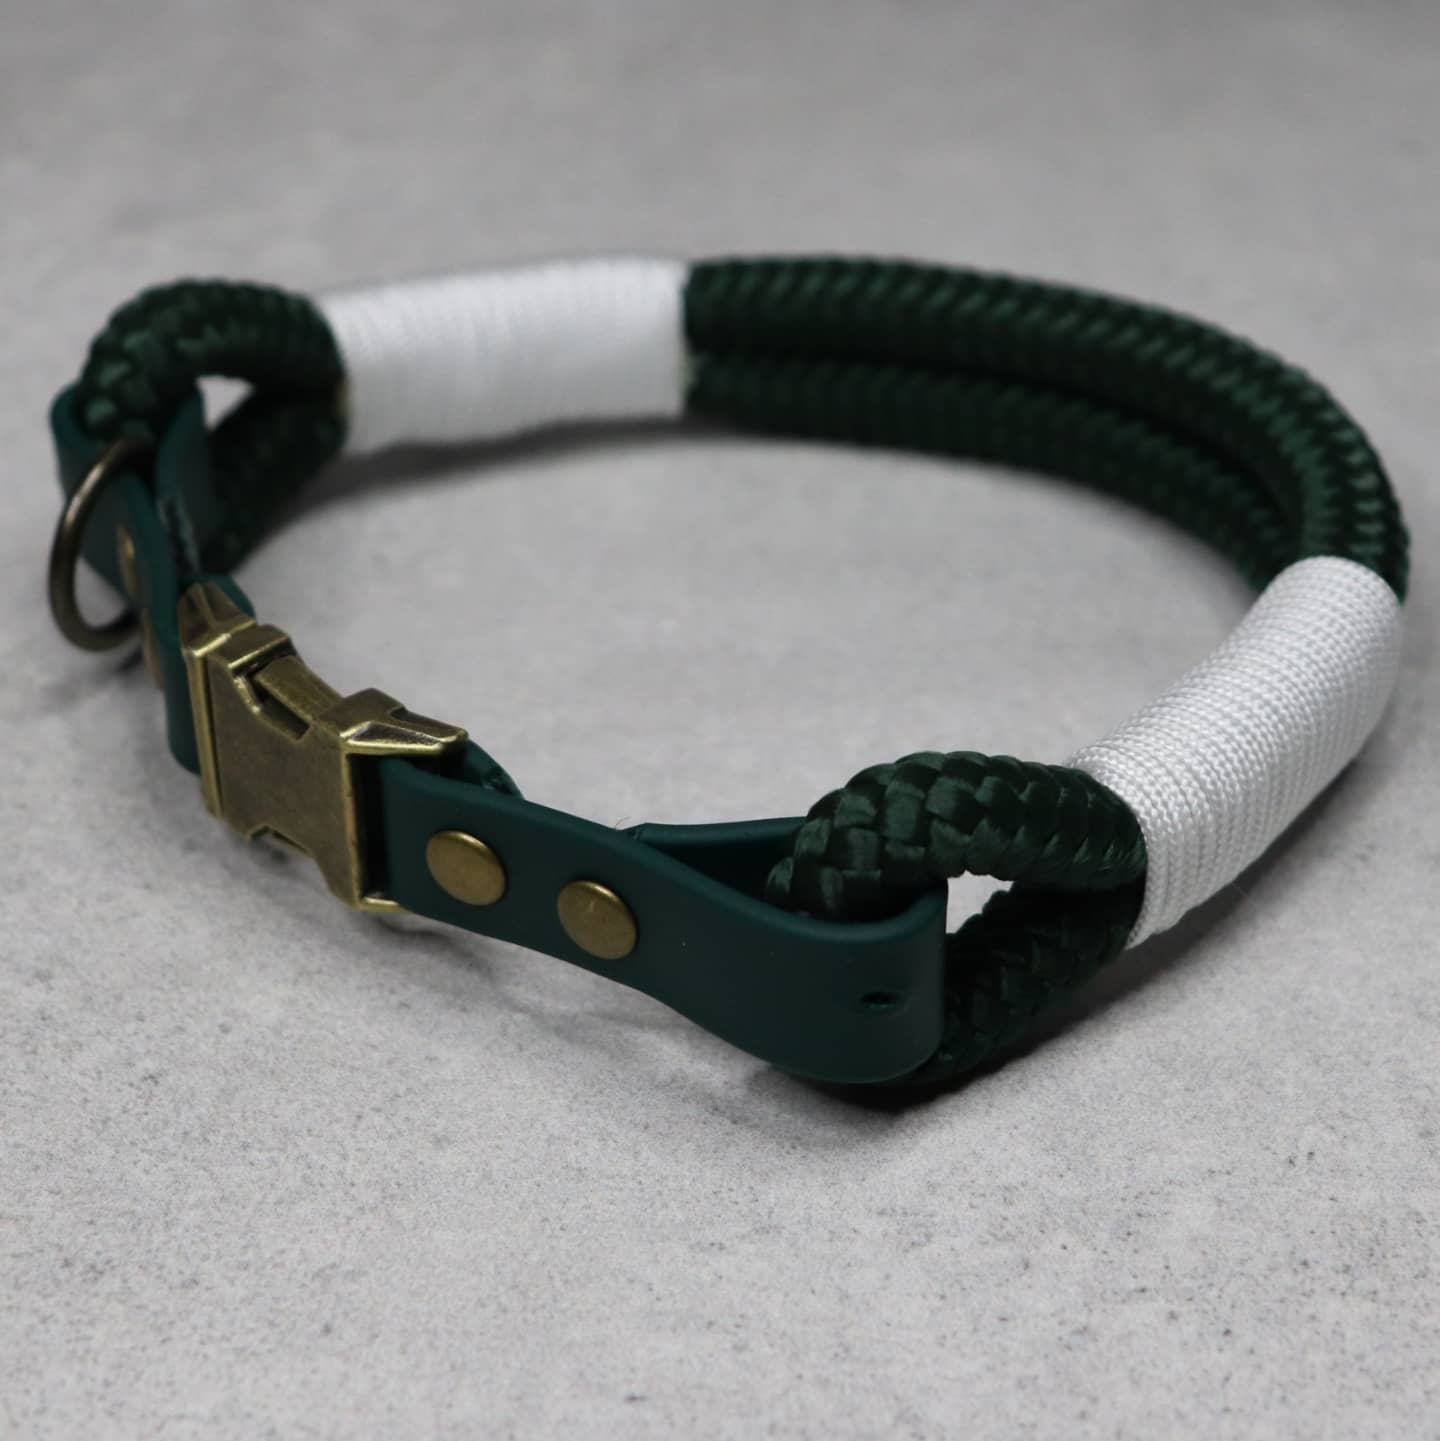 Double rope ID collar with biothane extender - Design your own with quick release buckle